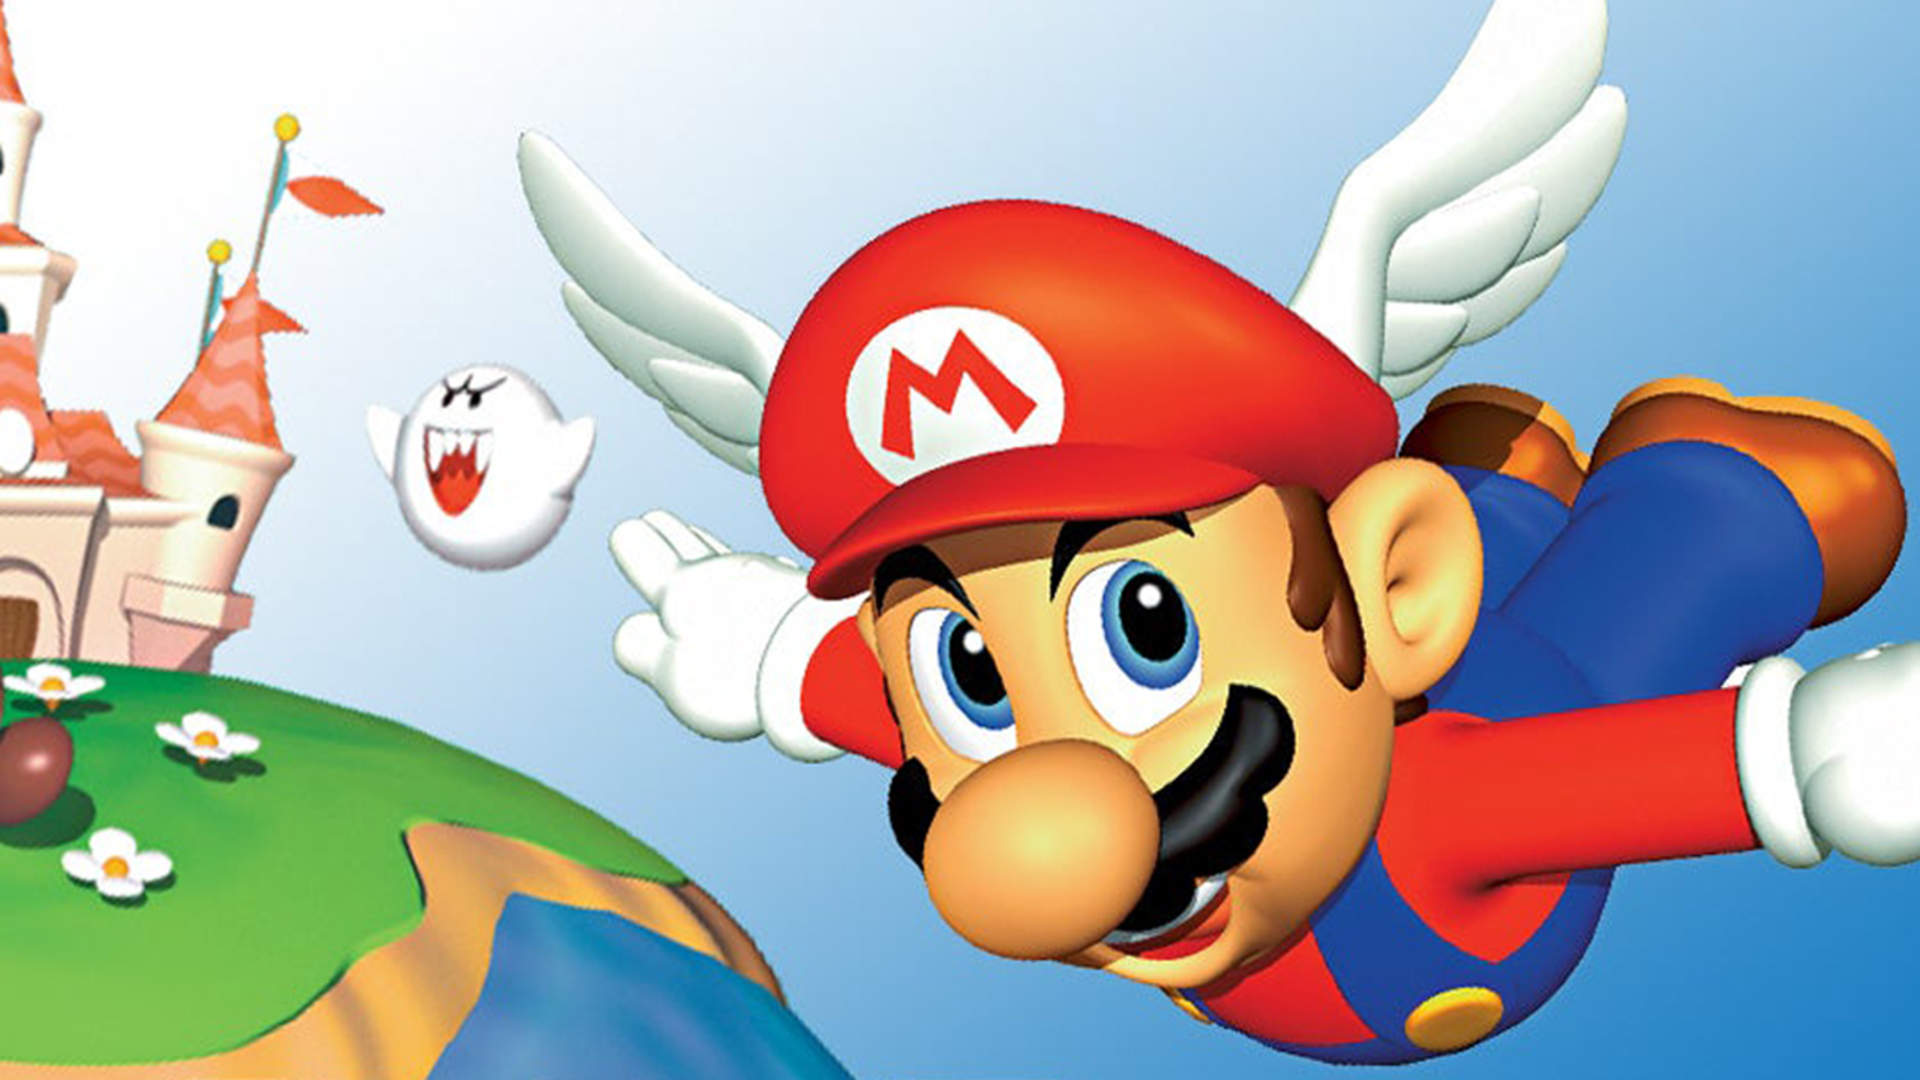 Rare 'Super Mario 64' video game sells for $1.56 million at auction